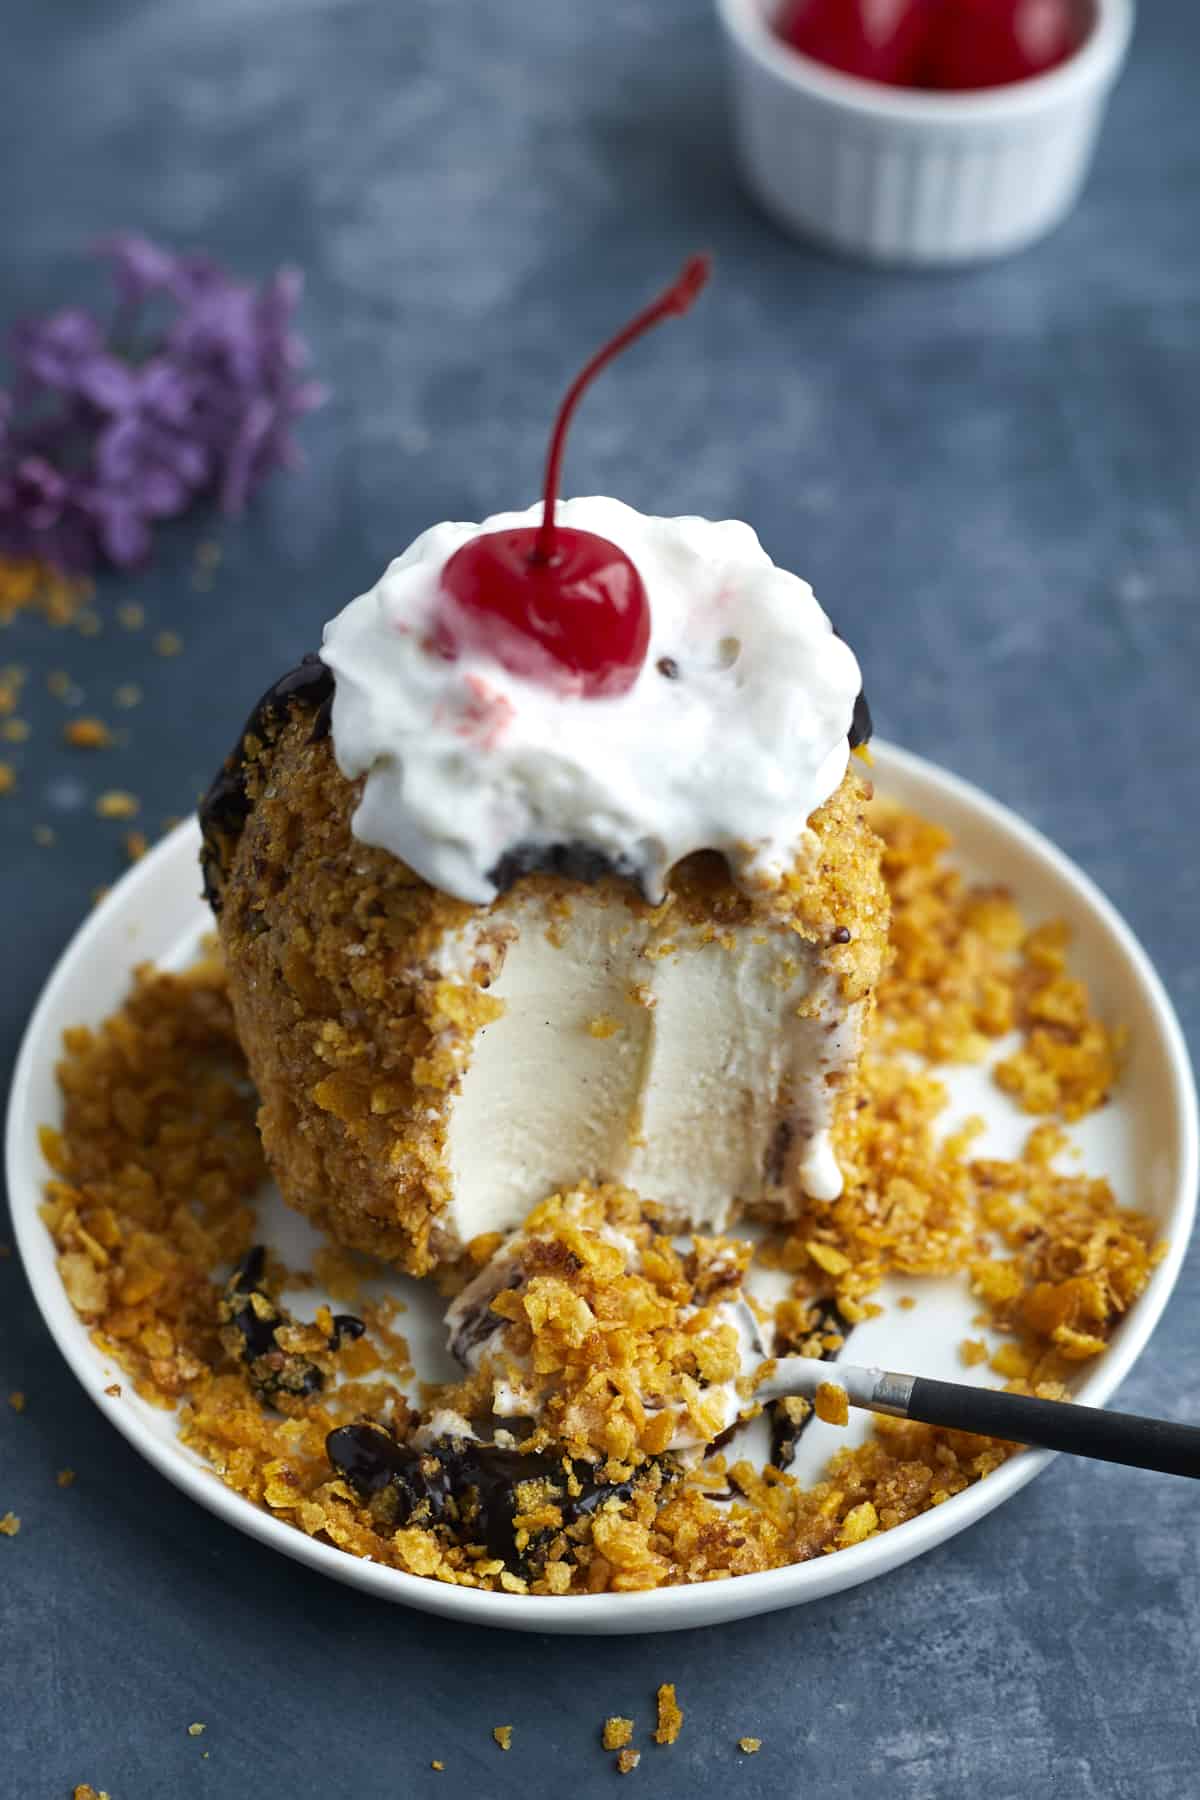 fried ice cream on a plate with a bite taken out